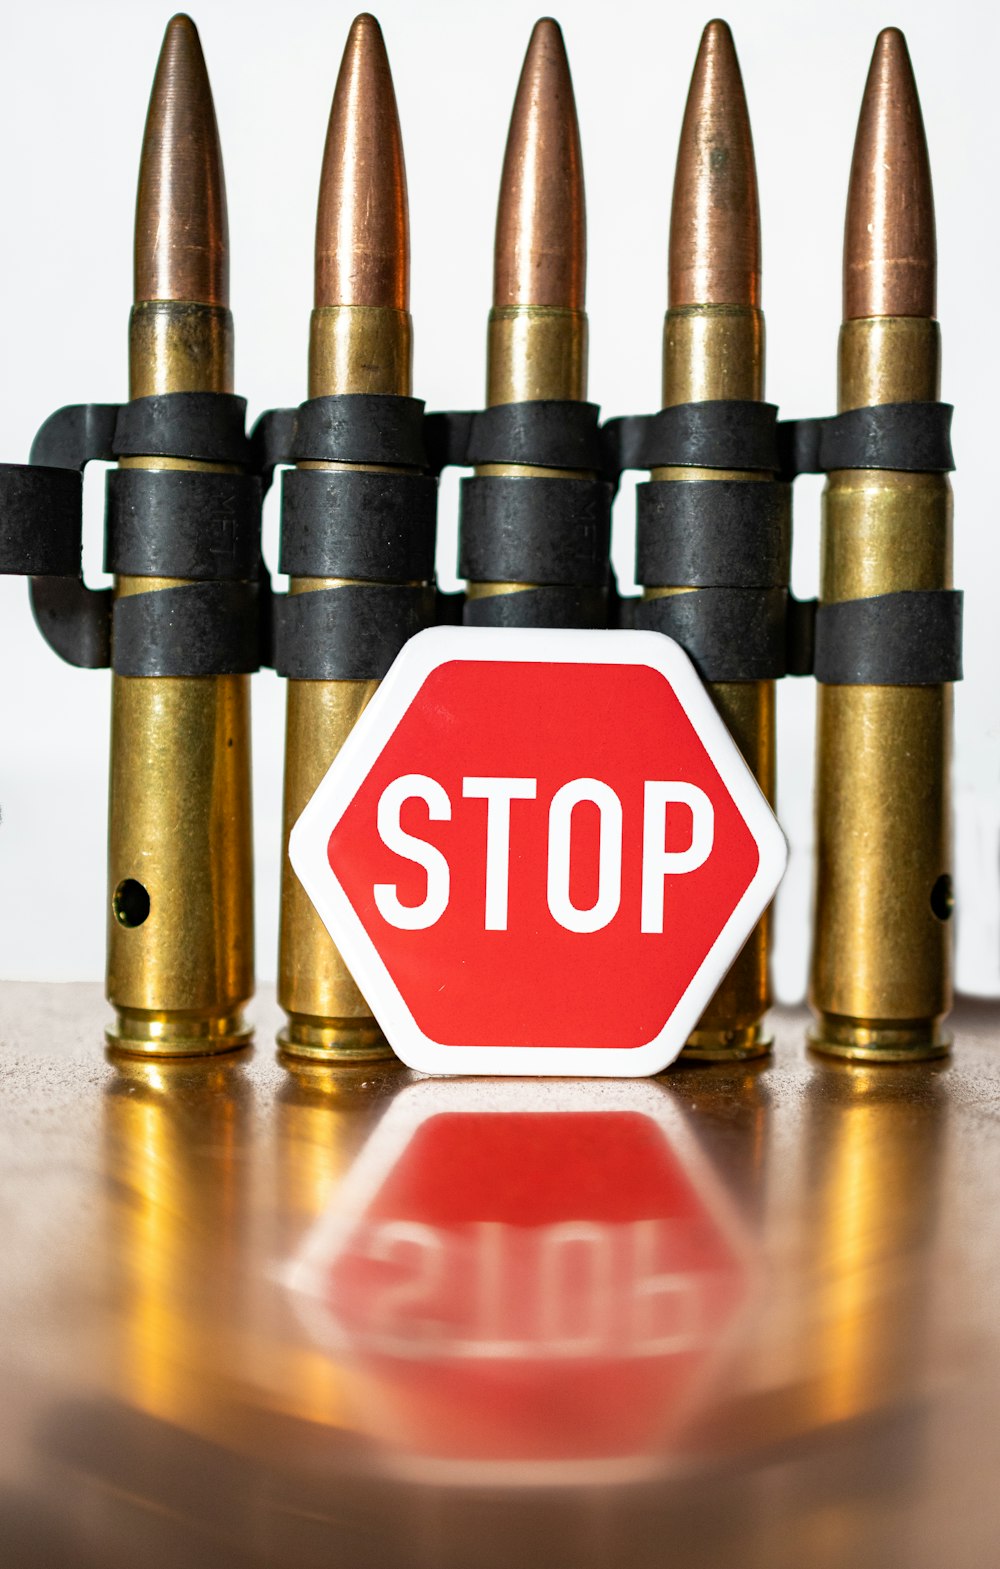 a close up of a stop sign near some bullet shells